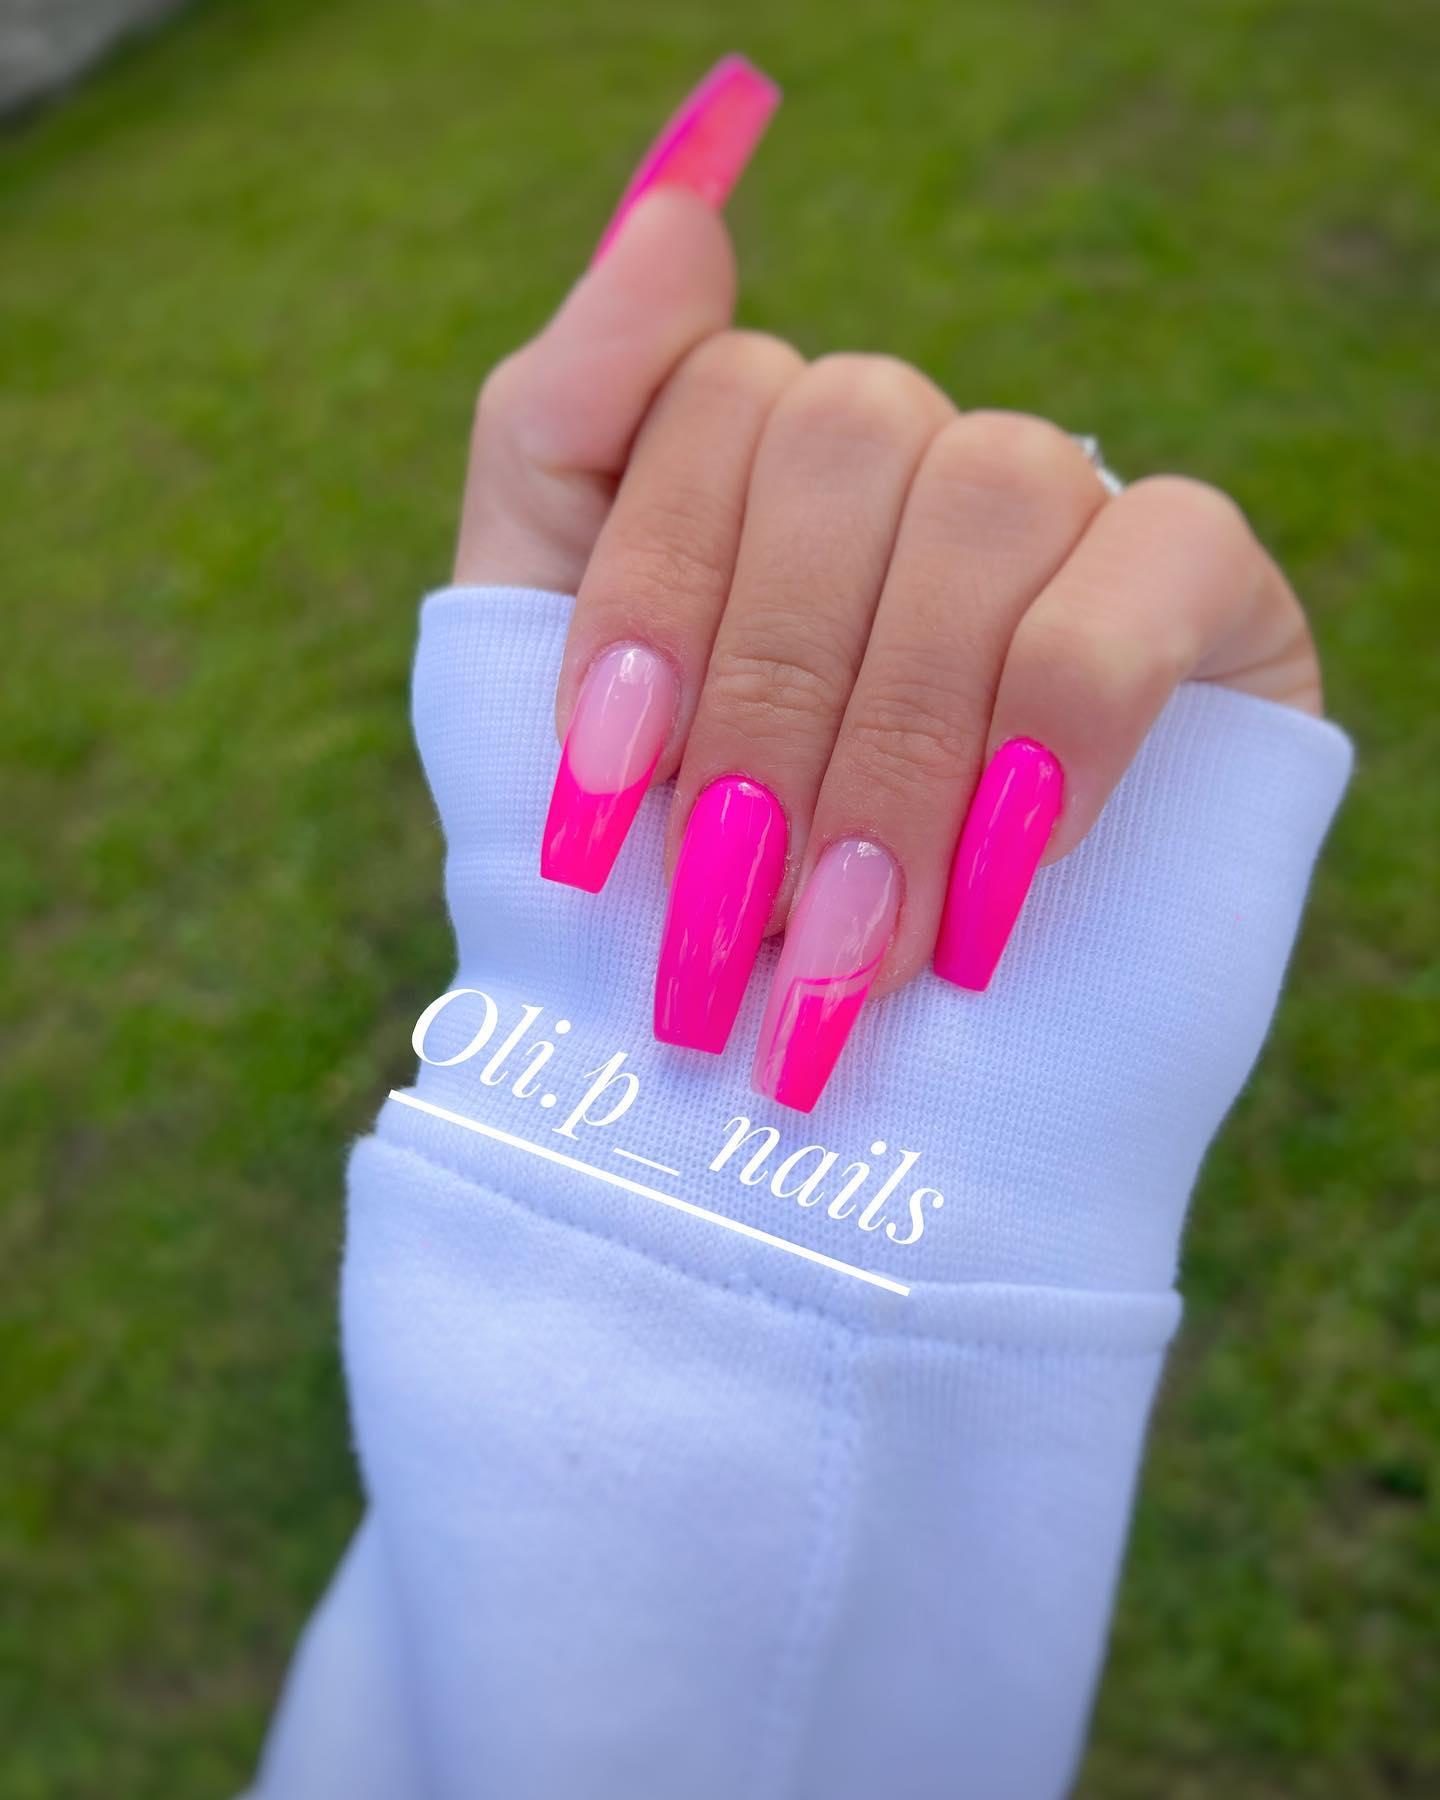 These Barbie pink long coffin nails will look great on party women and those who enjoy longer and bolder ideas.